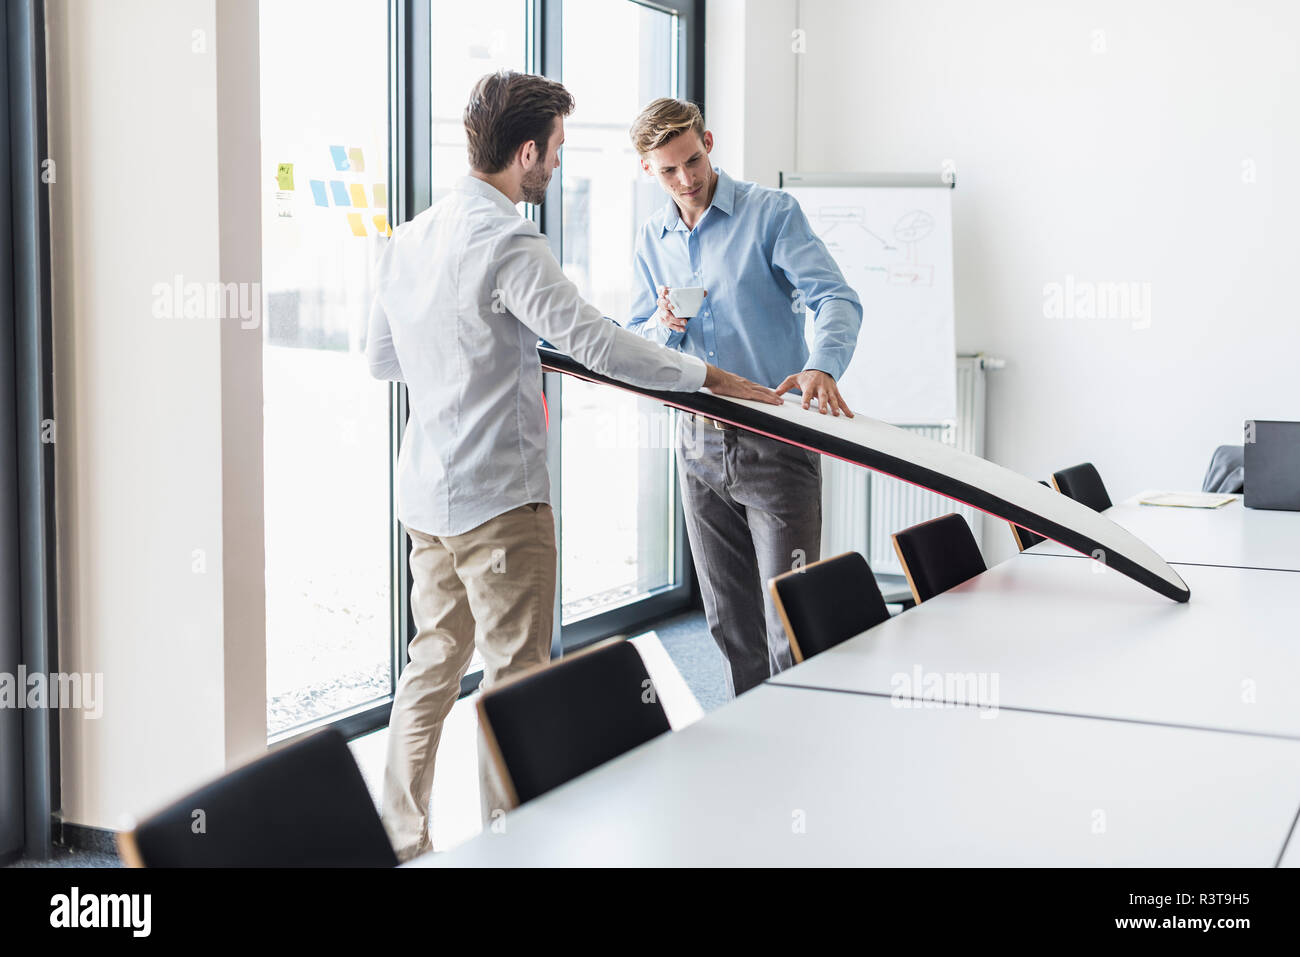 Two colleagues examining surfboard in office Stock Photo